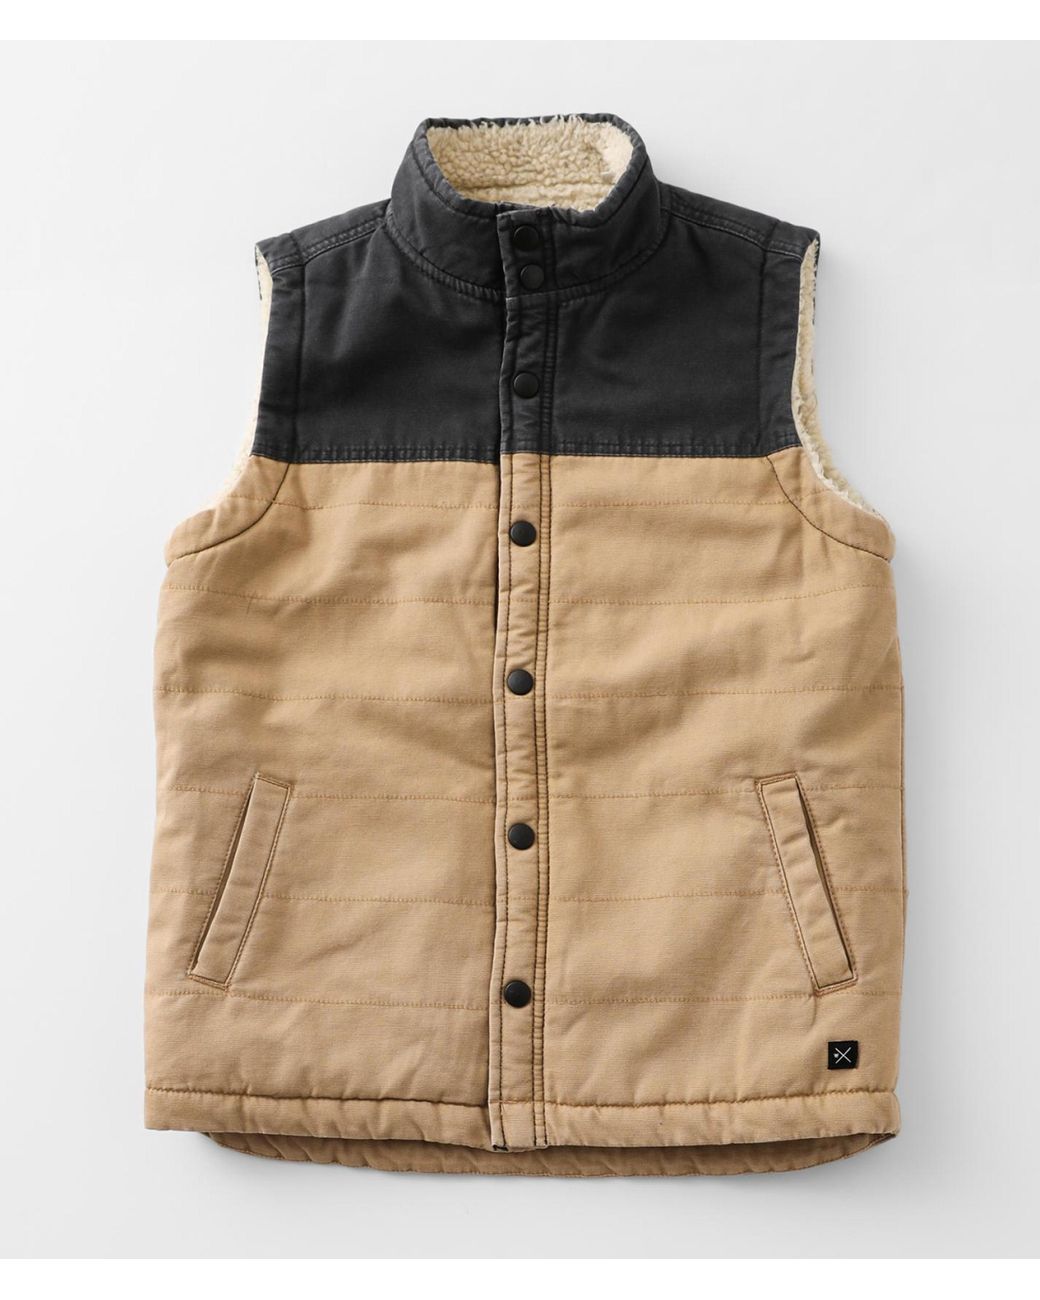 Outpost Makers Canvas Vest - Brown Small, Men's